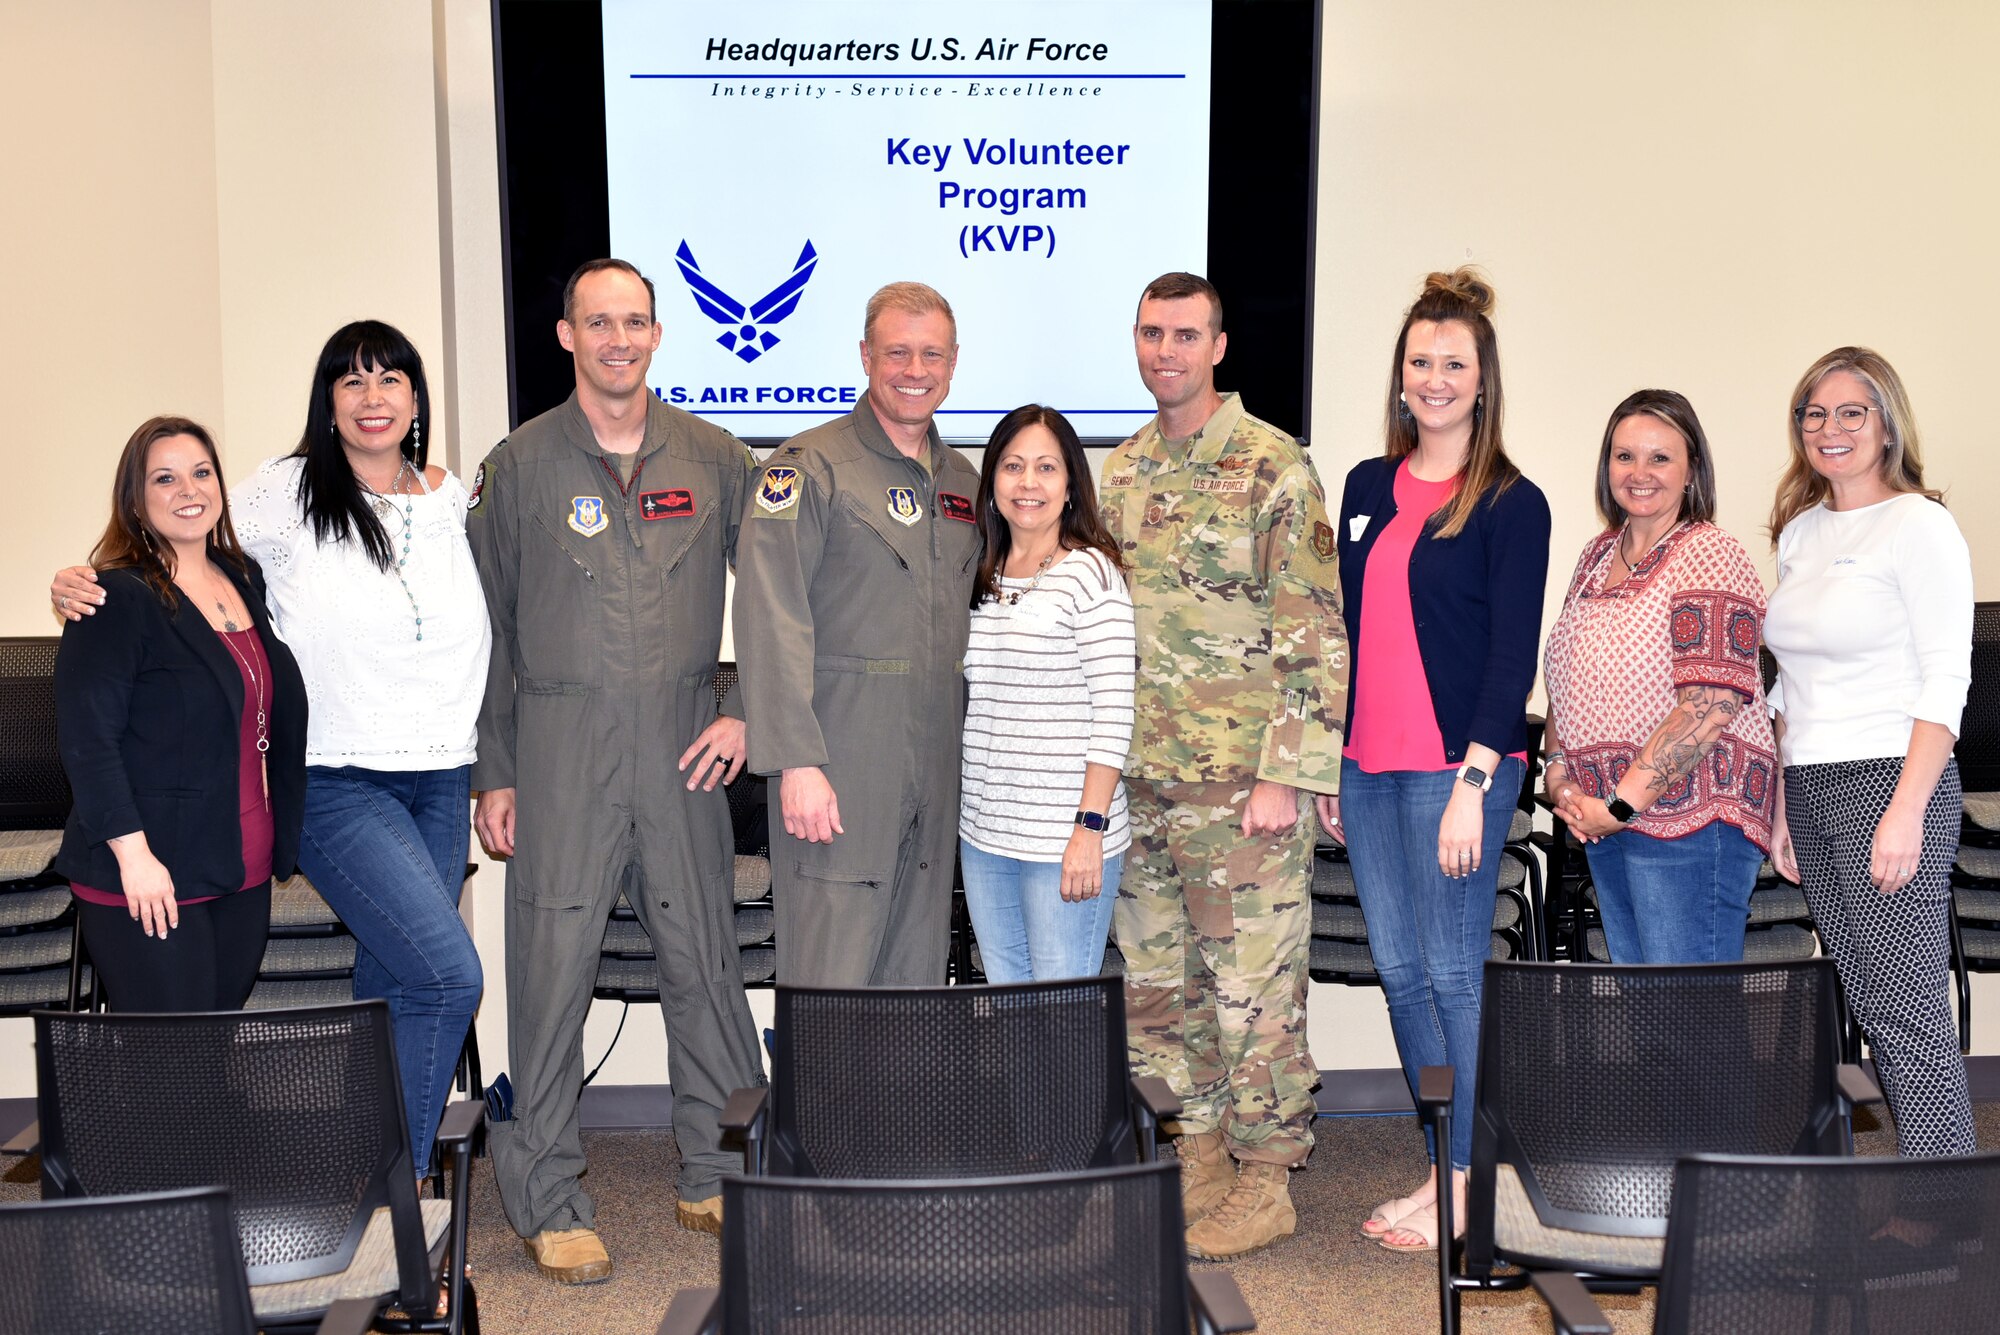 Key Volunteers stand with 301st Fighter Wing leadership during the Key Volunteers Program introduction at Naval Air Station Joint Reserve Base Fort Worth, Texas on May 1st , 2022. The Key Volunteers Program introduction brings old and new volunteers together to inform them of the 301st FW's mission to train and deploy combat ready Airmen. (U.S. Air Force photo by Staff Sgt. Randall Moose)